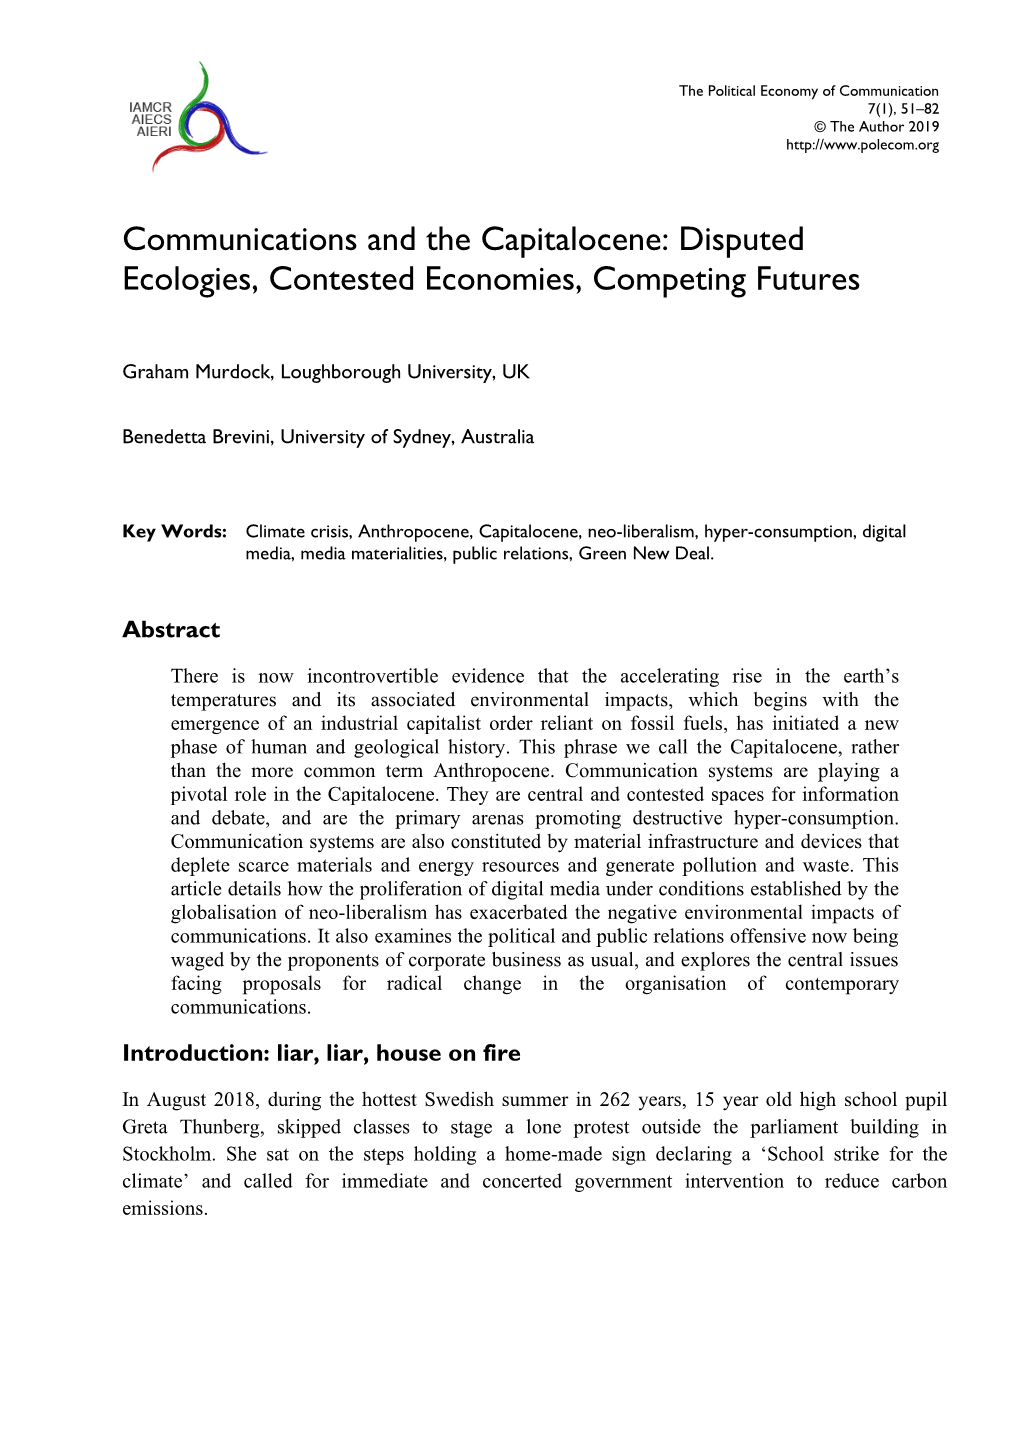 Communications and the Capitalocene: Disputed Ecologies, Contested Economies, Competing Futures